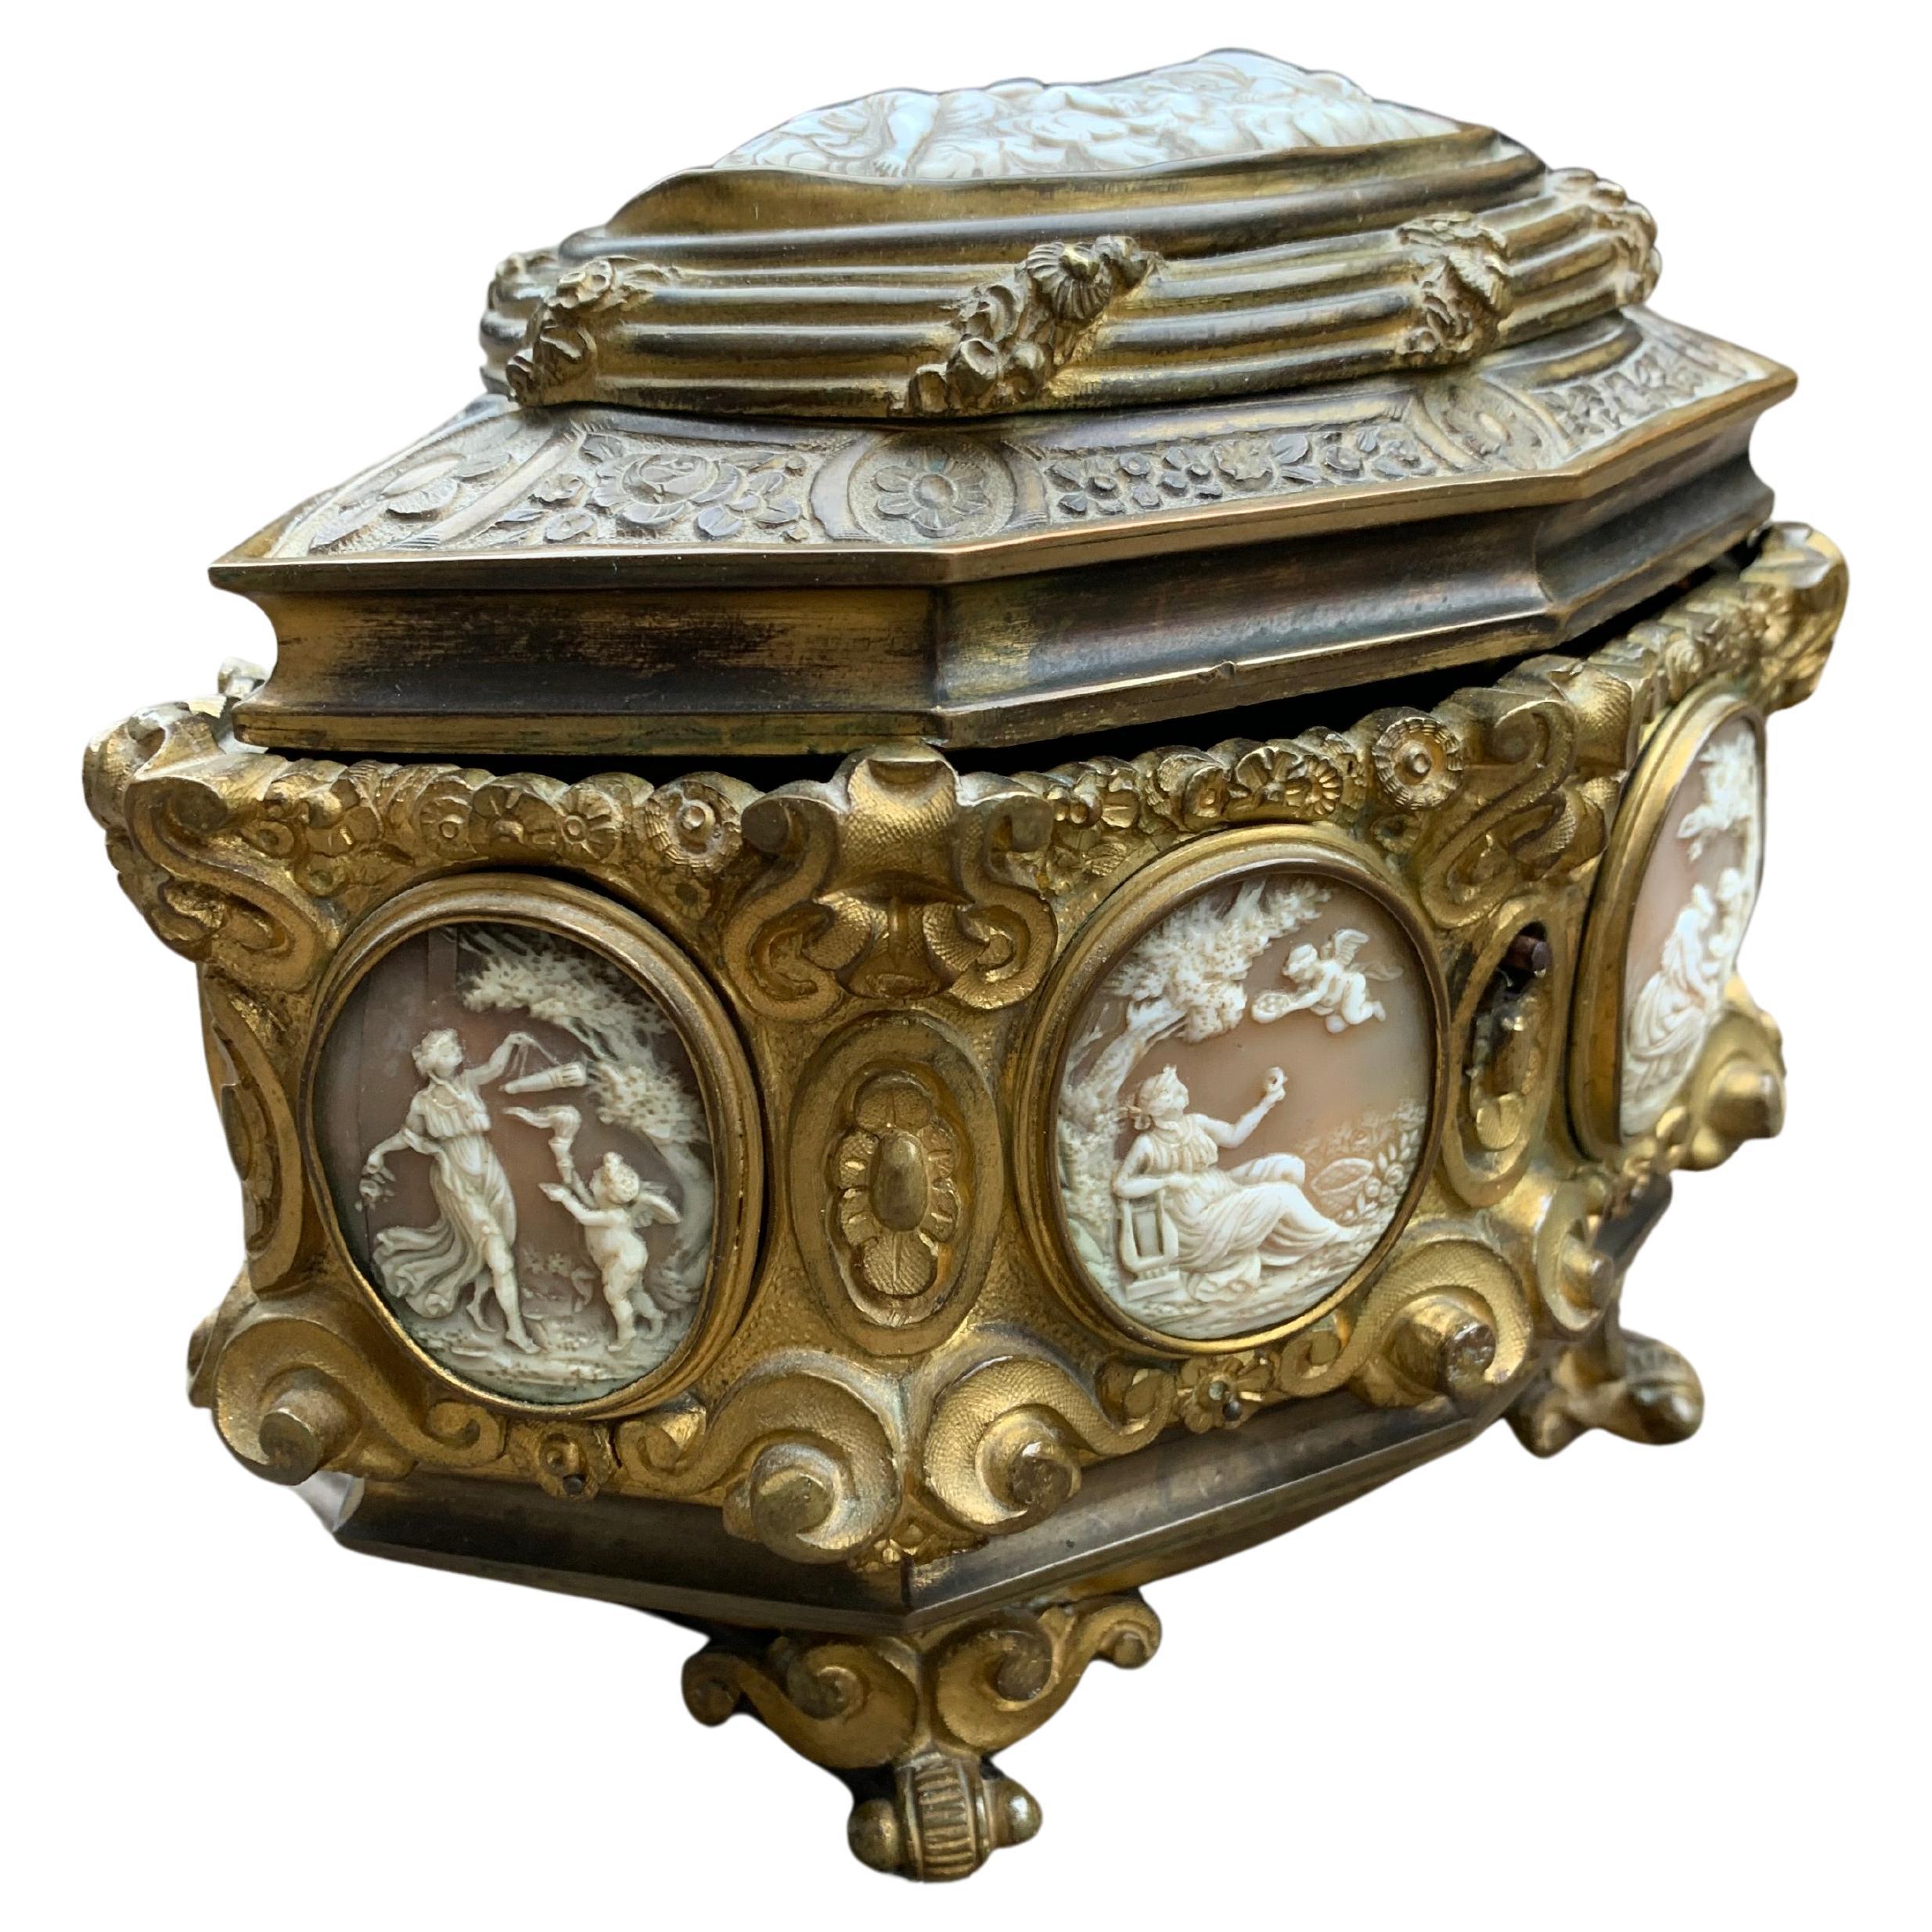 Jewelery Box in Bronze and Cameo by Tahan Paris 1800